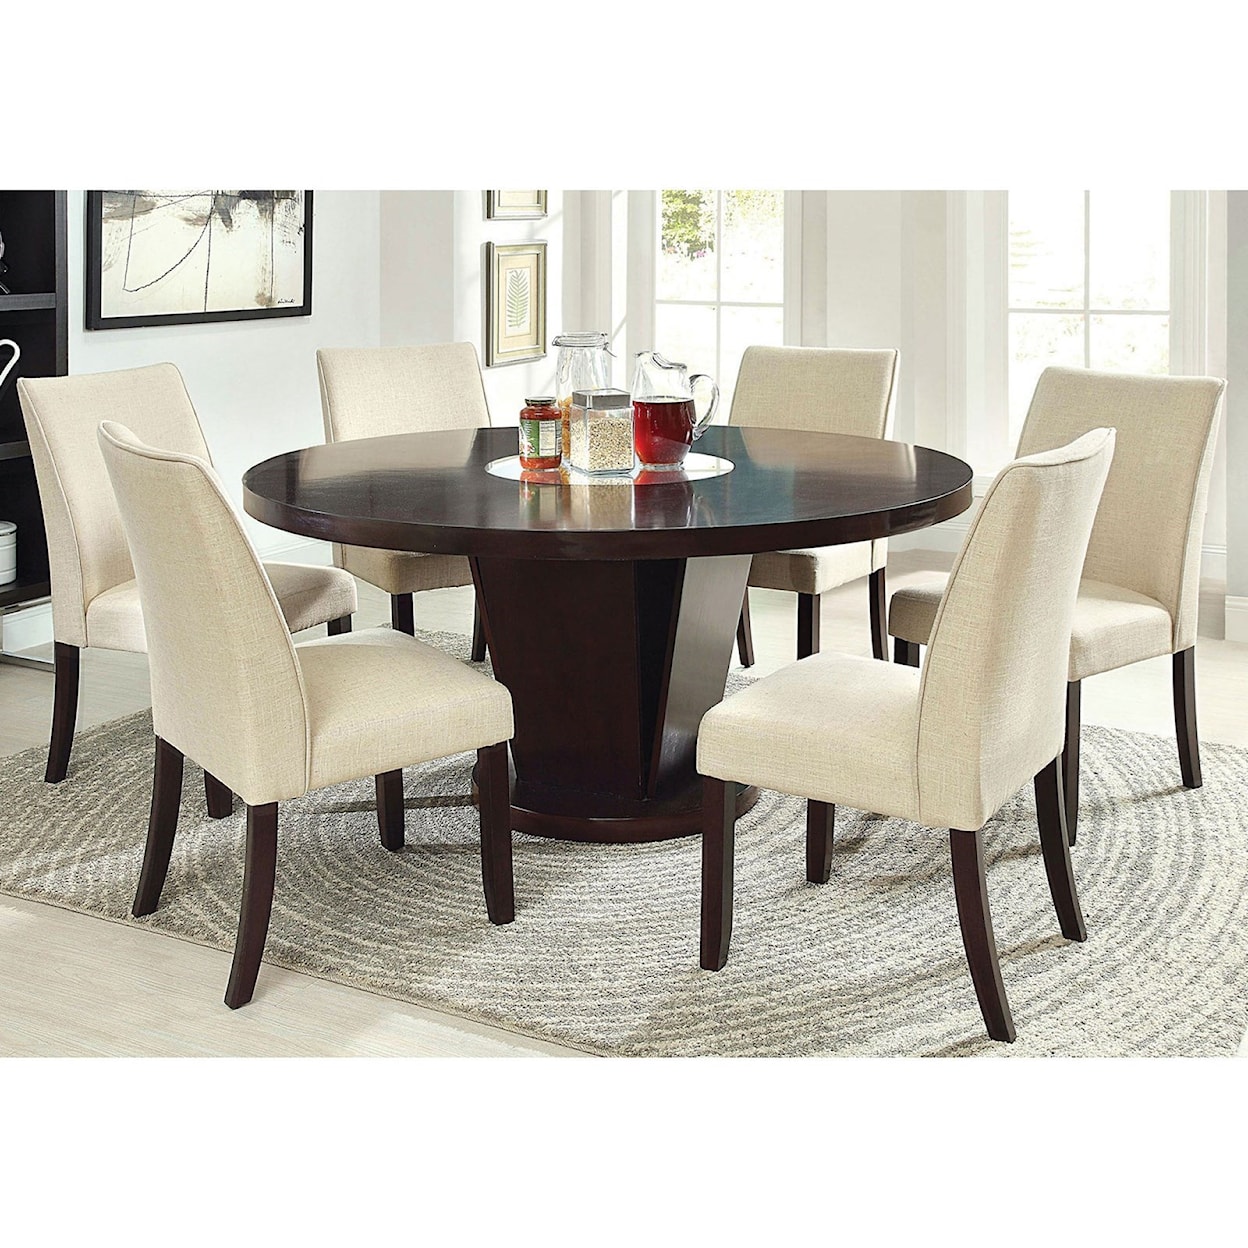 Furniture of America Cimma Round Dining Table